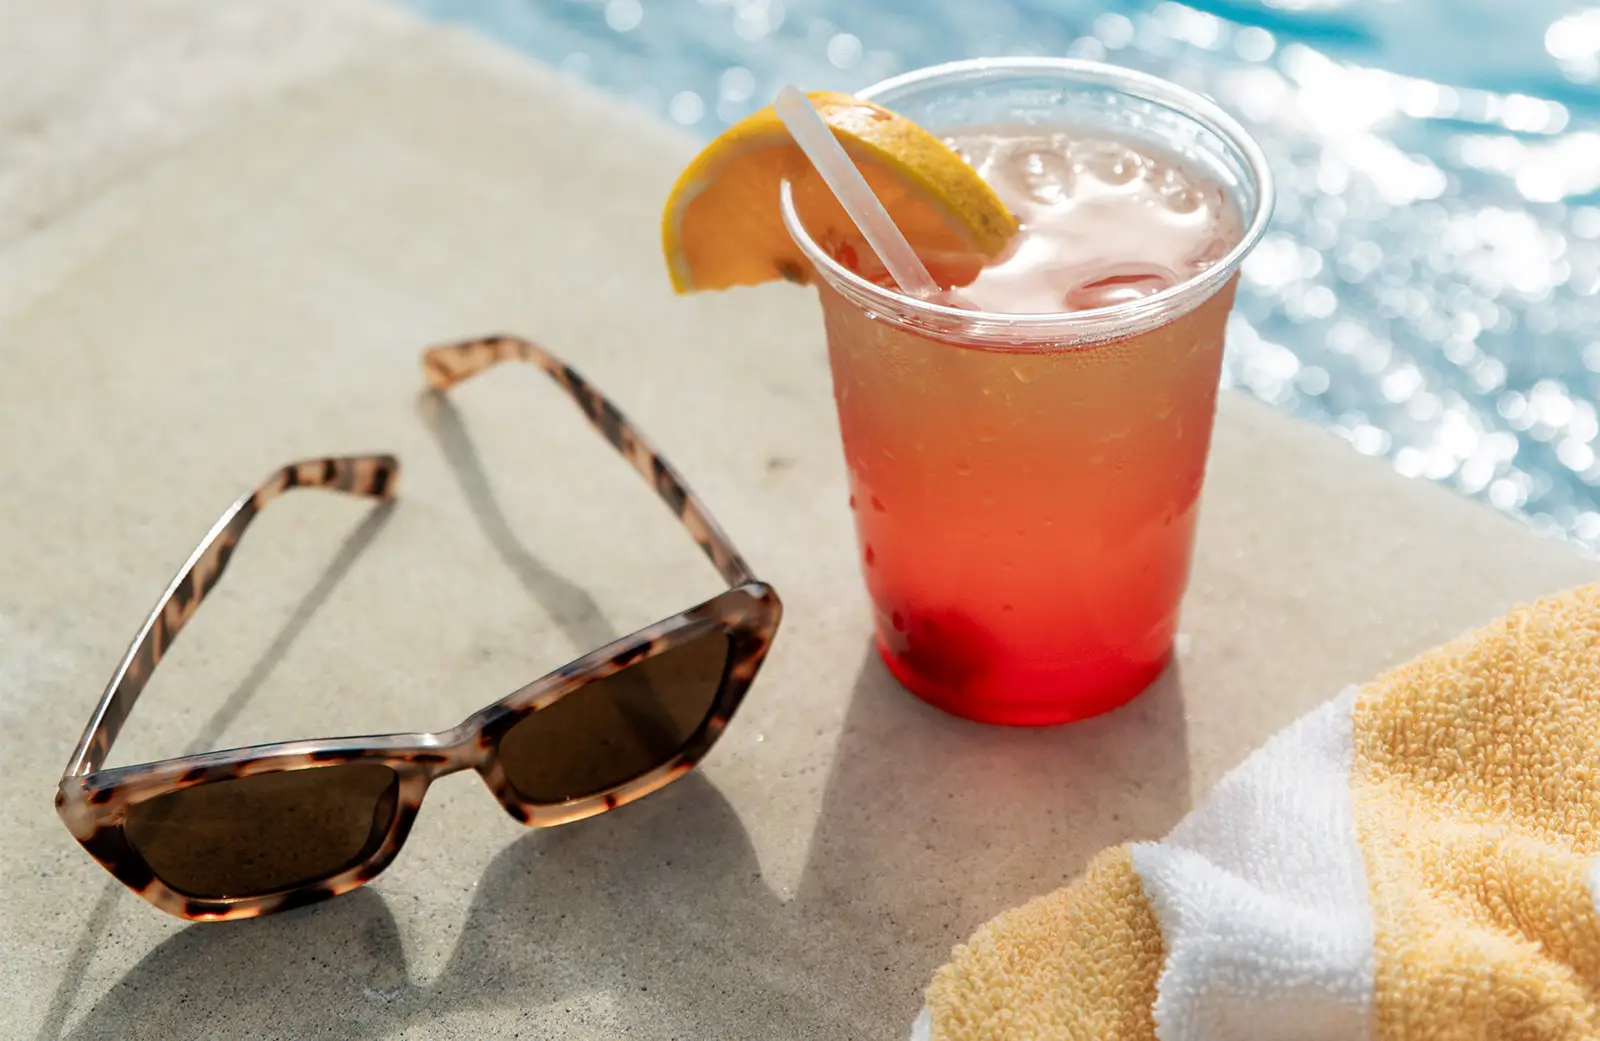 Drink and glasses by pool